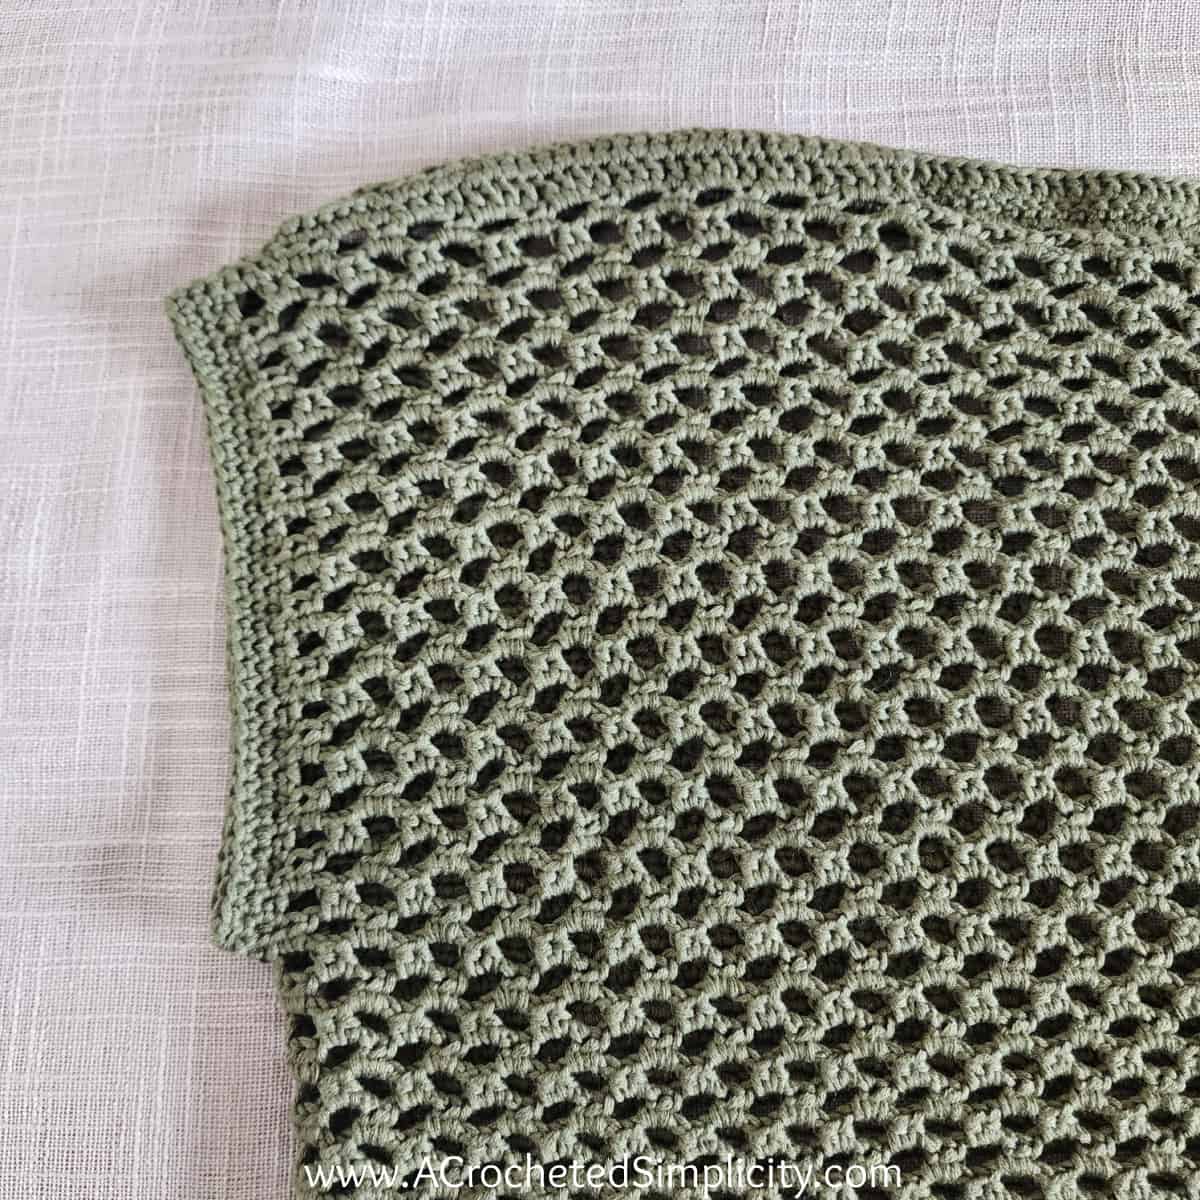 Close up of mesh crochet top showing sleeve edging.